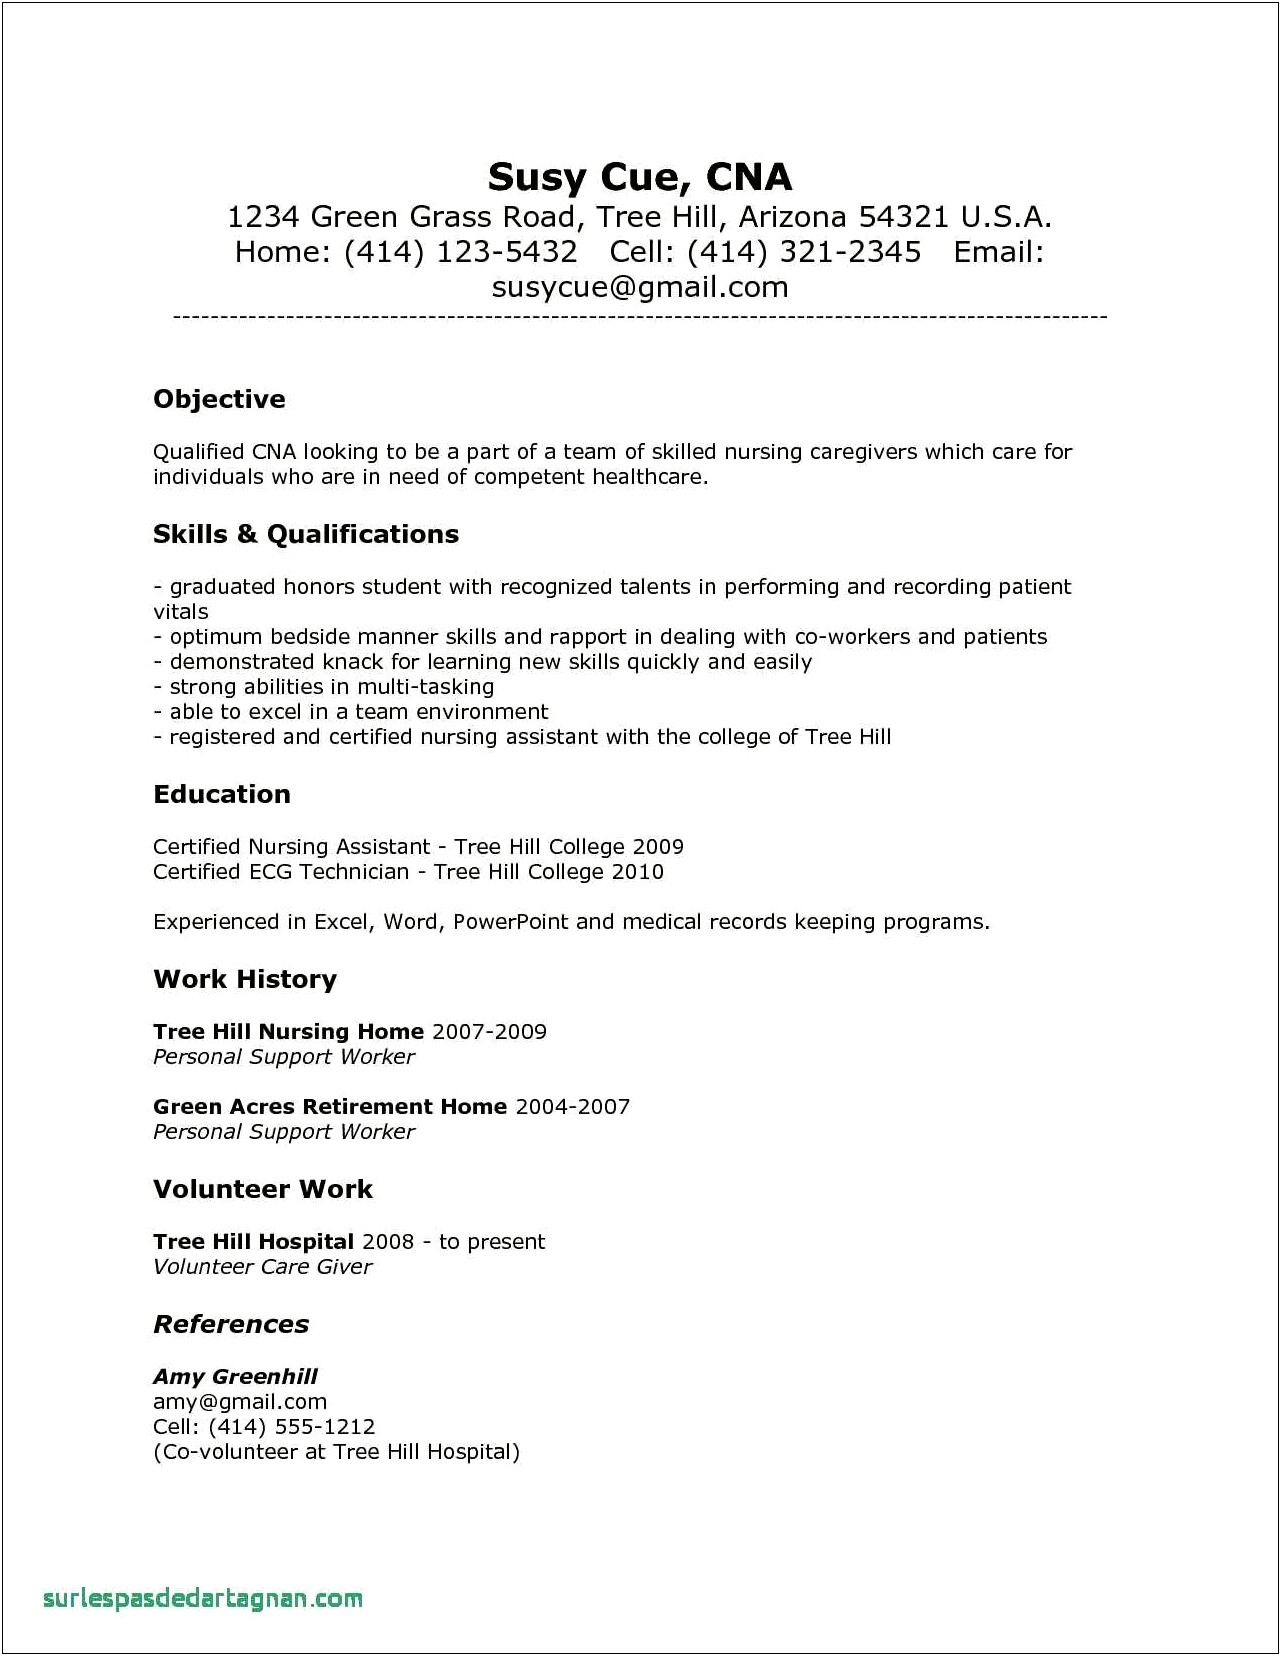 Resume For Registered Nurse With No Experience